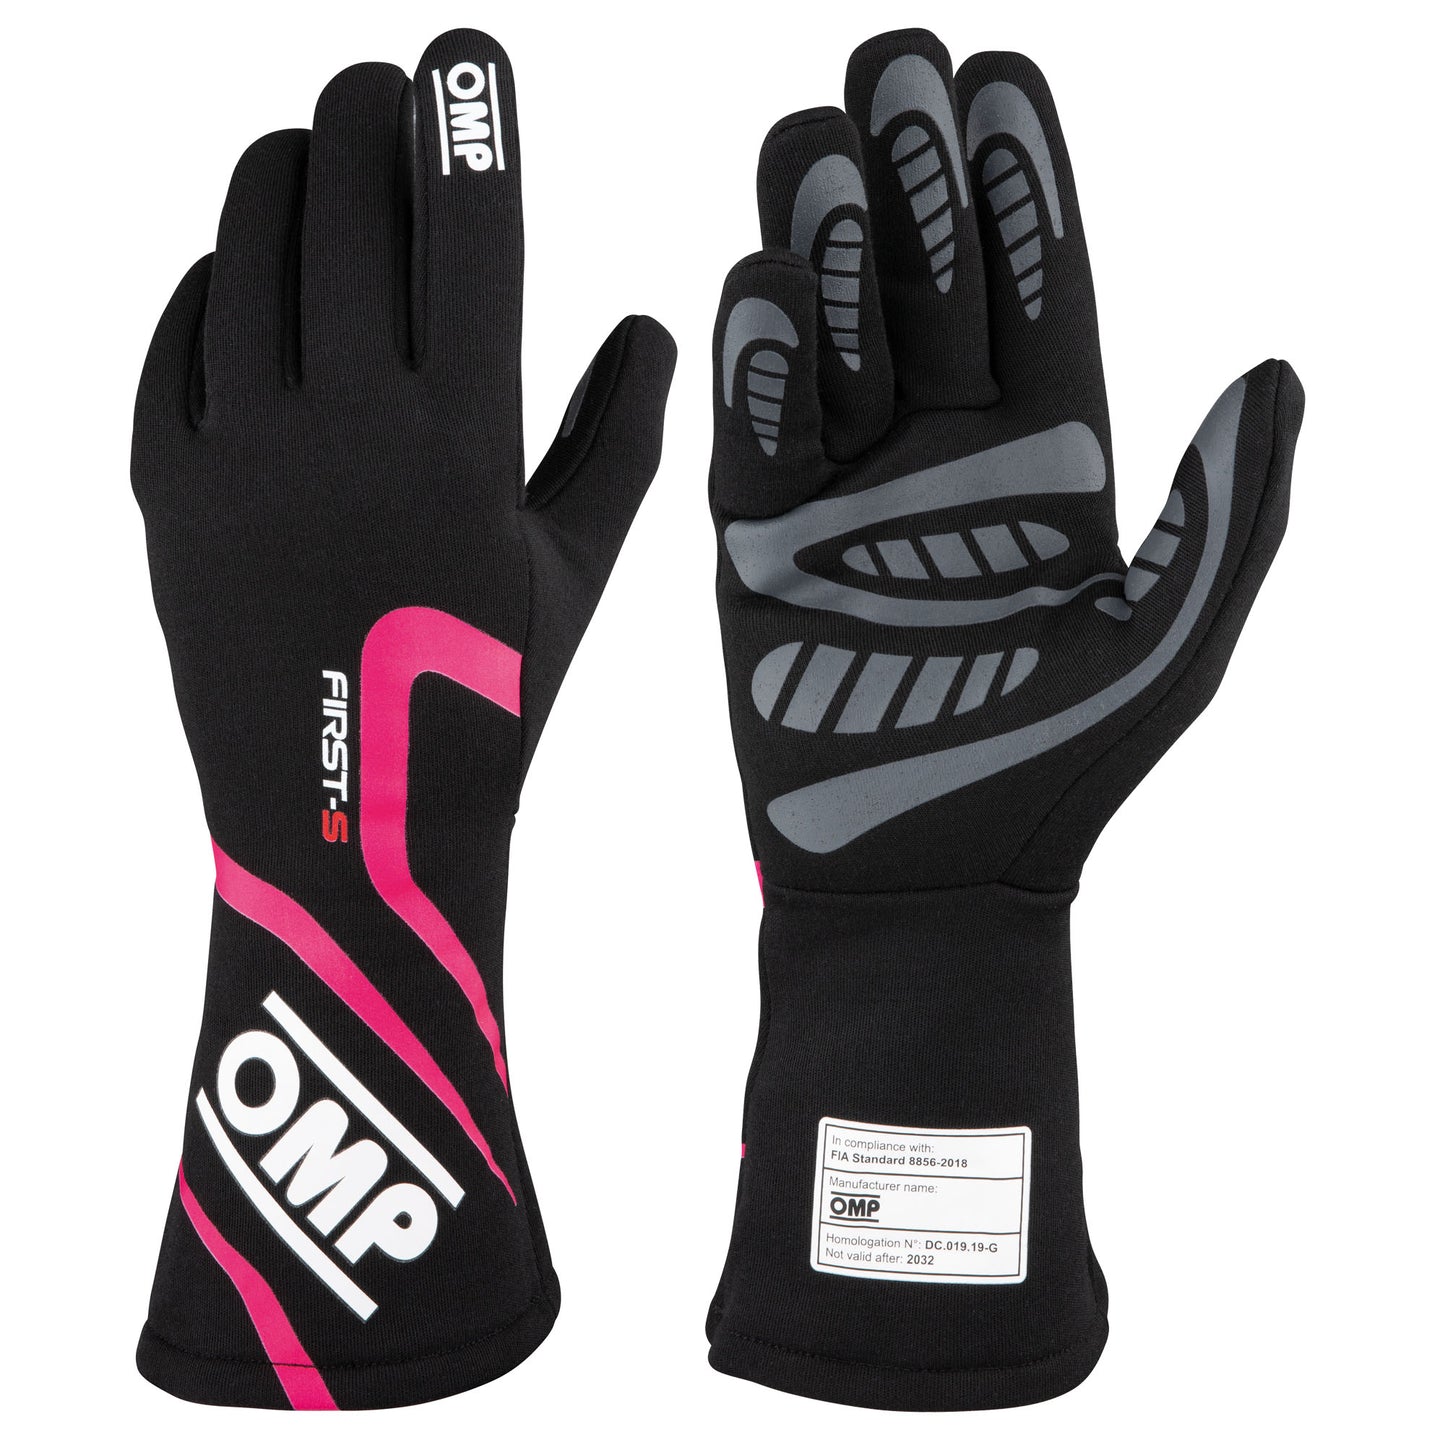 IB/761A OMP FIRST-S RACE GLOVES ENTRY LEVEL FIREPROOF MOTORSPORT FIA 8856-2018